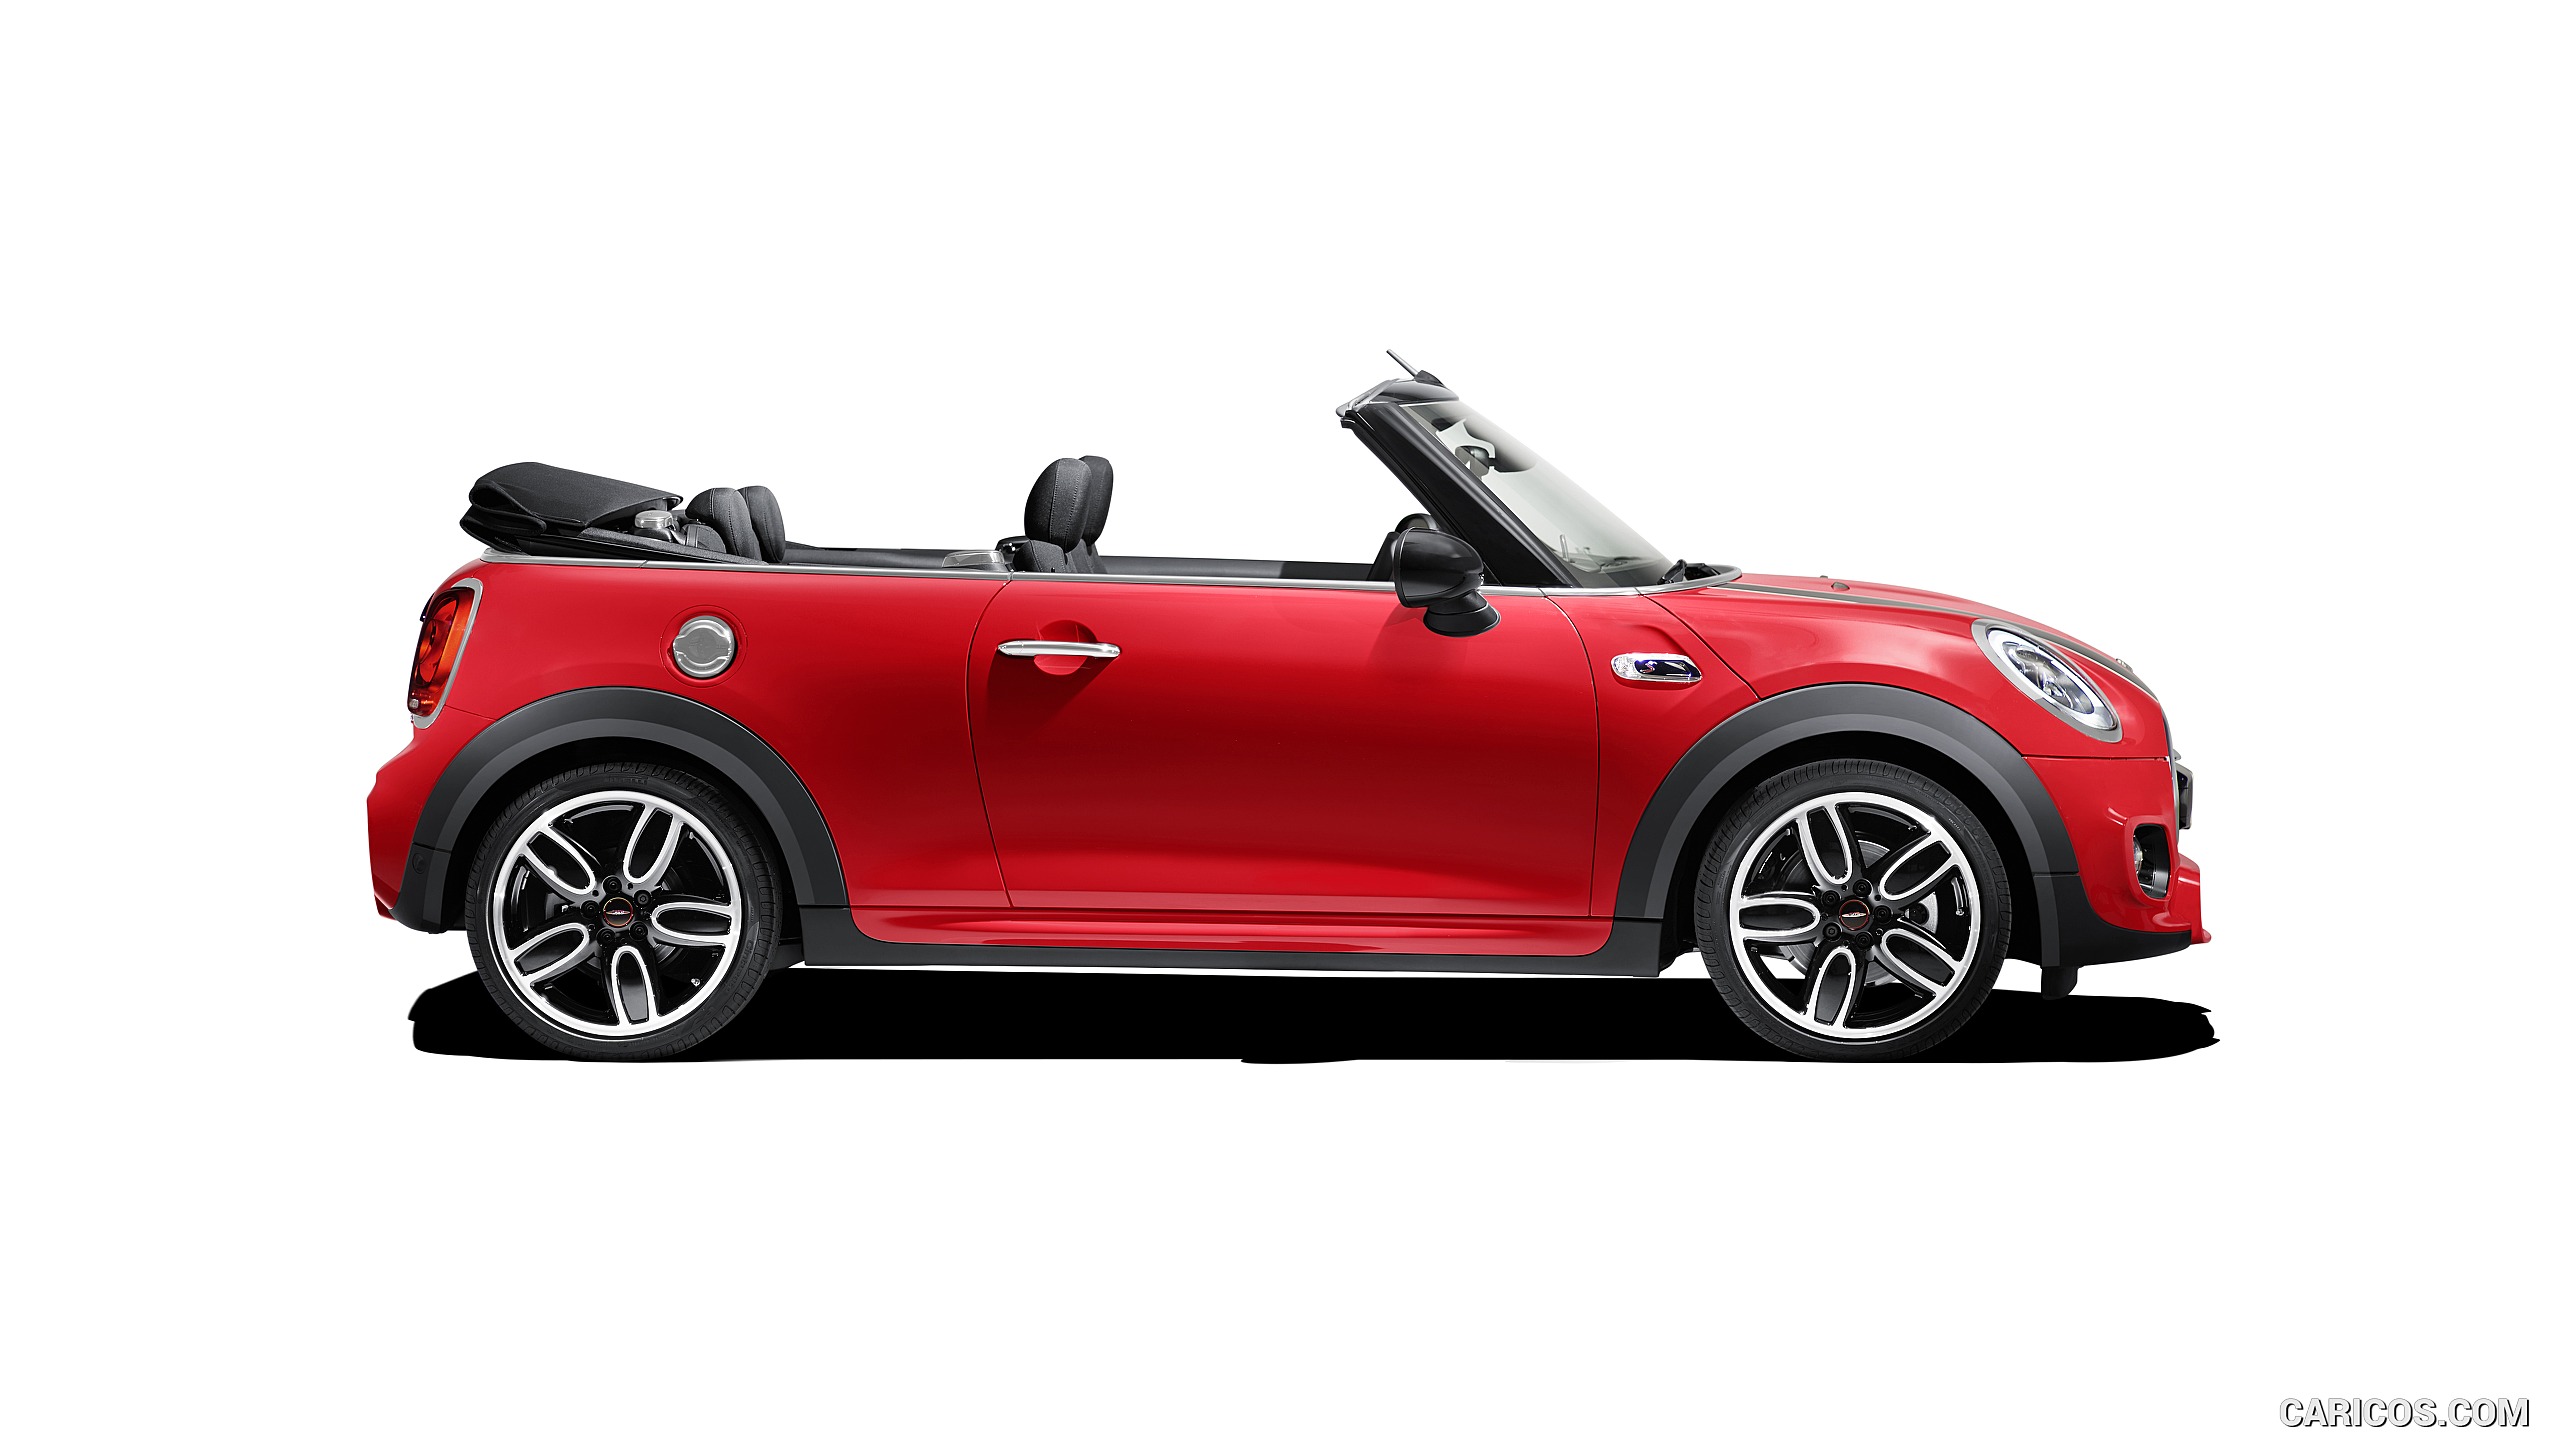 2016 MINI Cooper S Convertible with John Cooper Works Exterior package (Color: Chili Red), #133 of 147